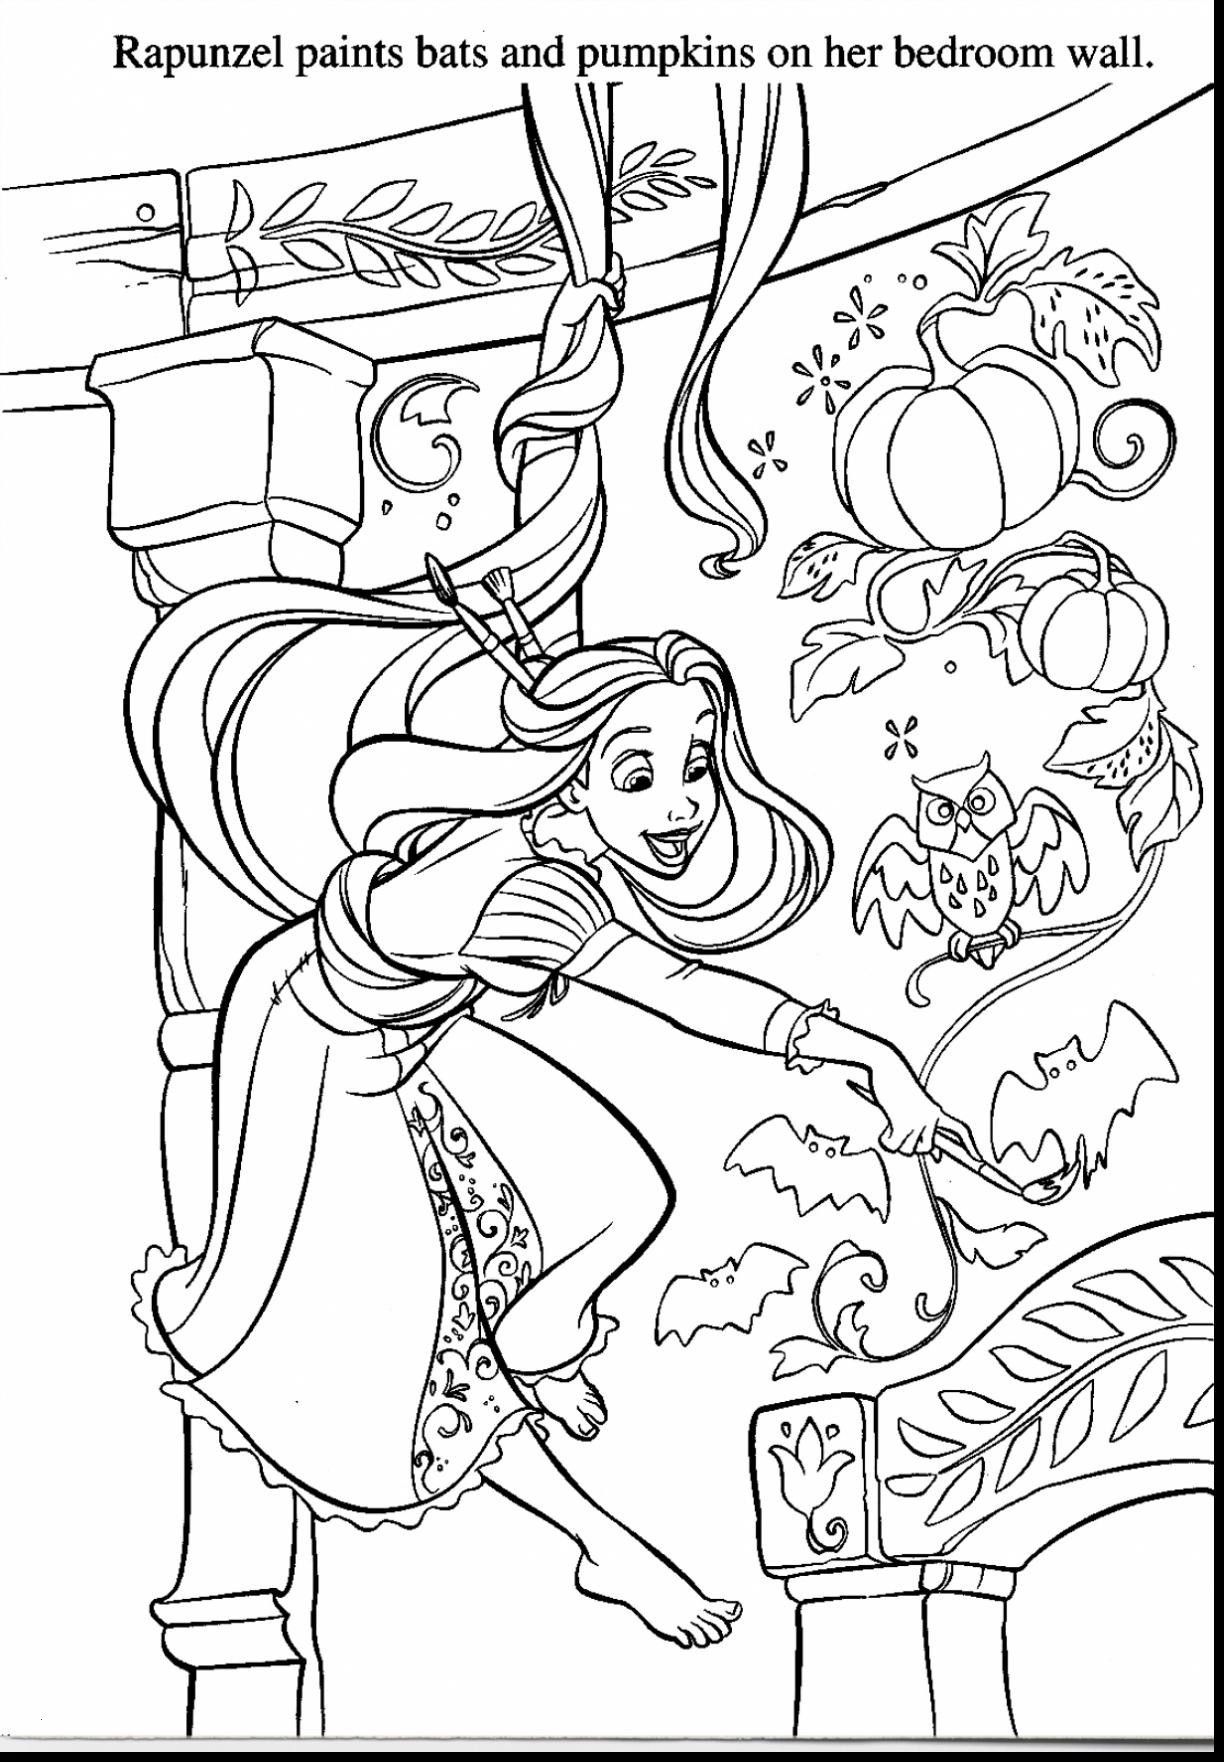 Disney Princess Halloween Coloring Pages Luxury 49 Lovely Graph Disney Princess Halloween Coloring Pages